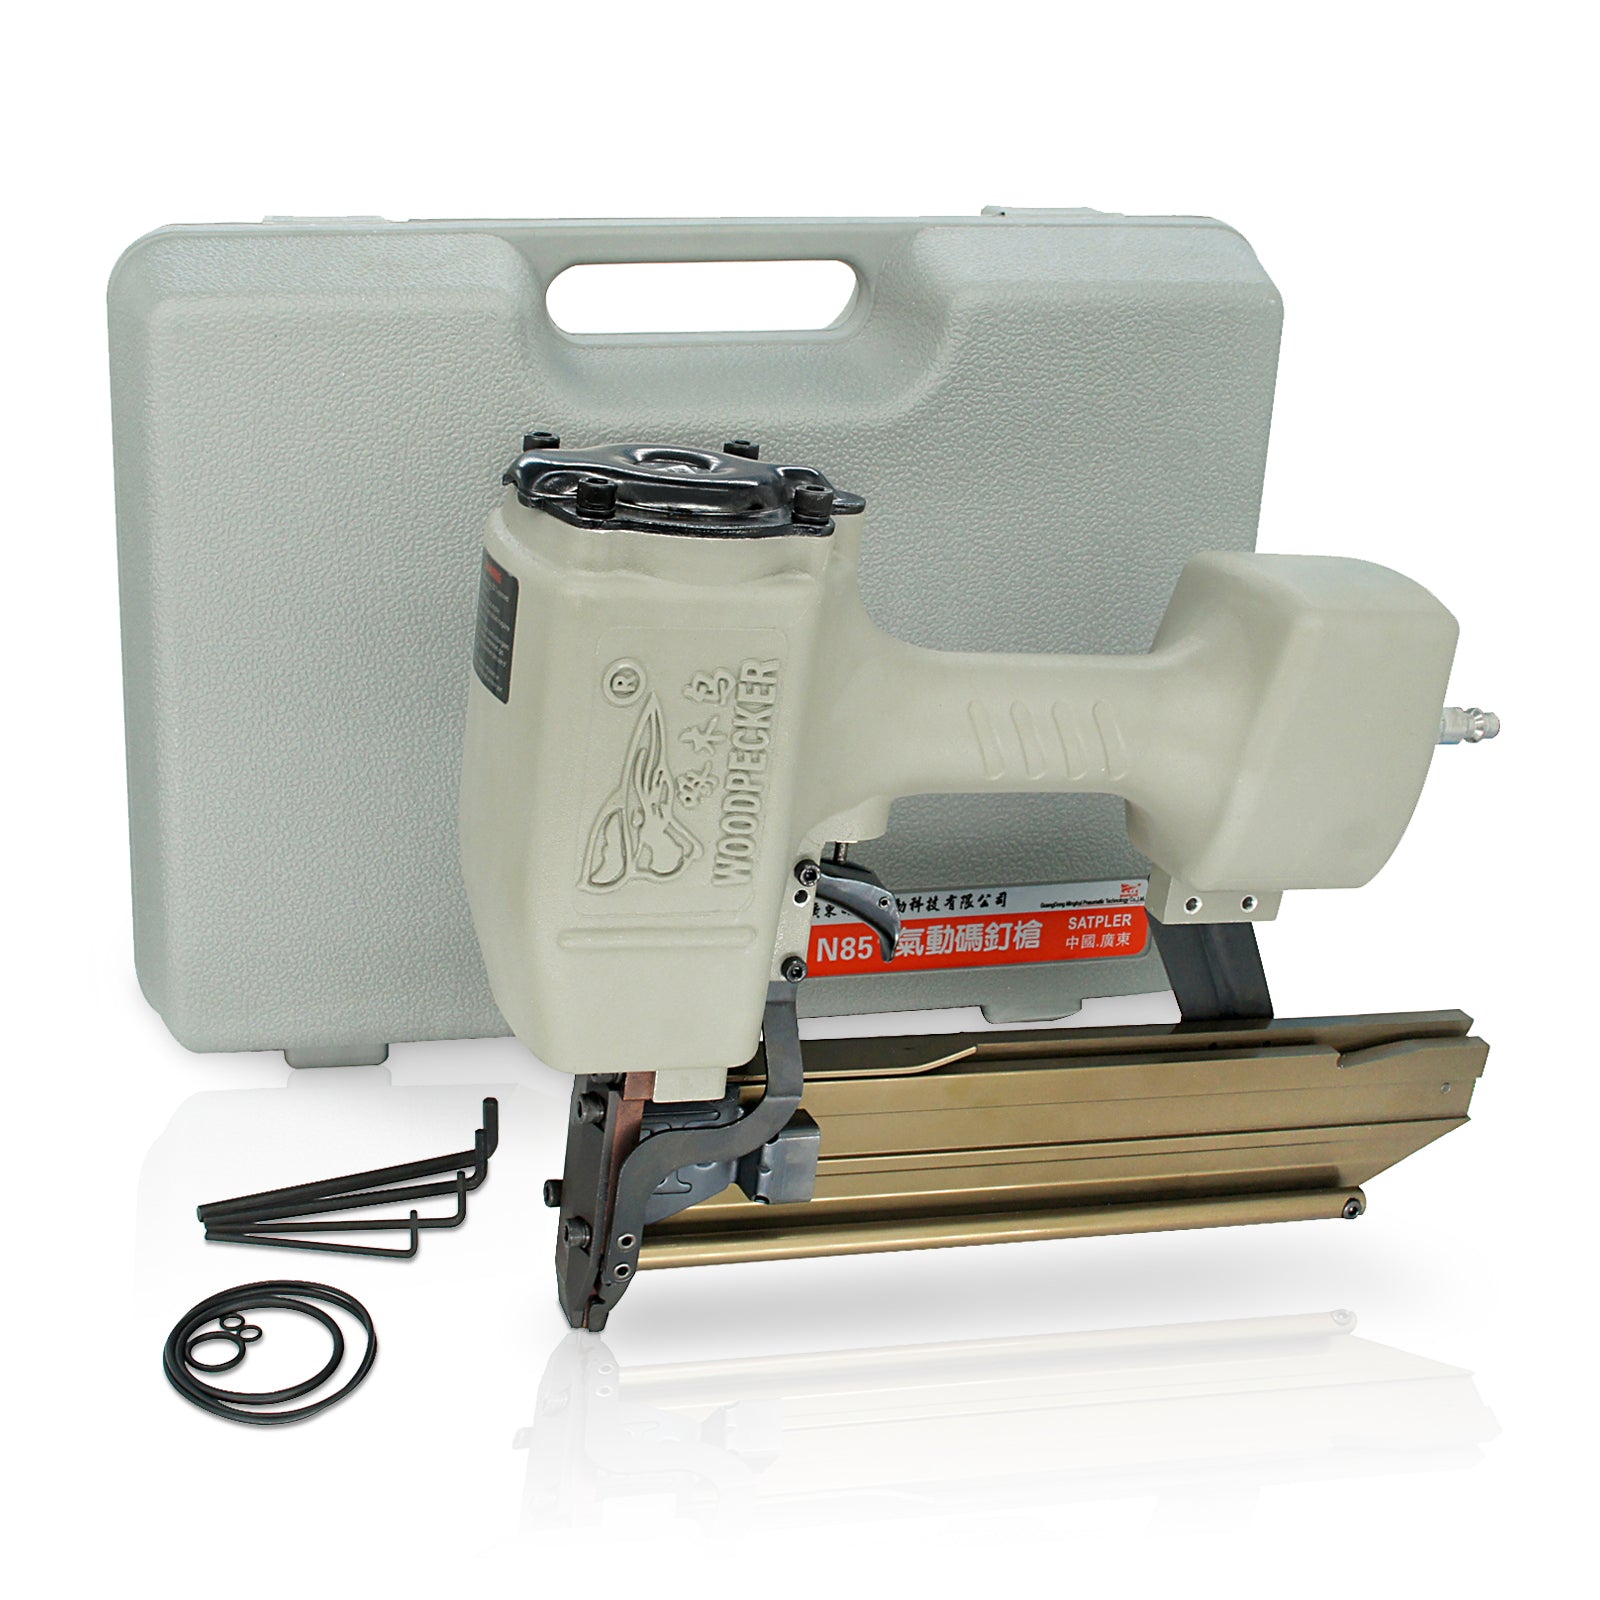 Woodpecker N851 16 Gauge Pneumatic Construction Stapler with Safety, 7/16-Inch Crown